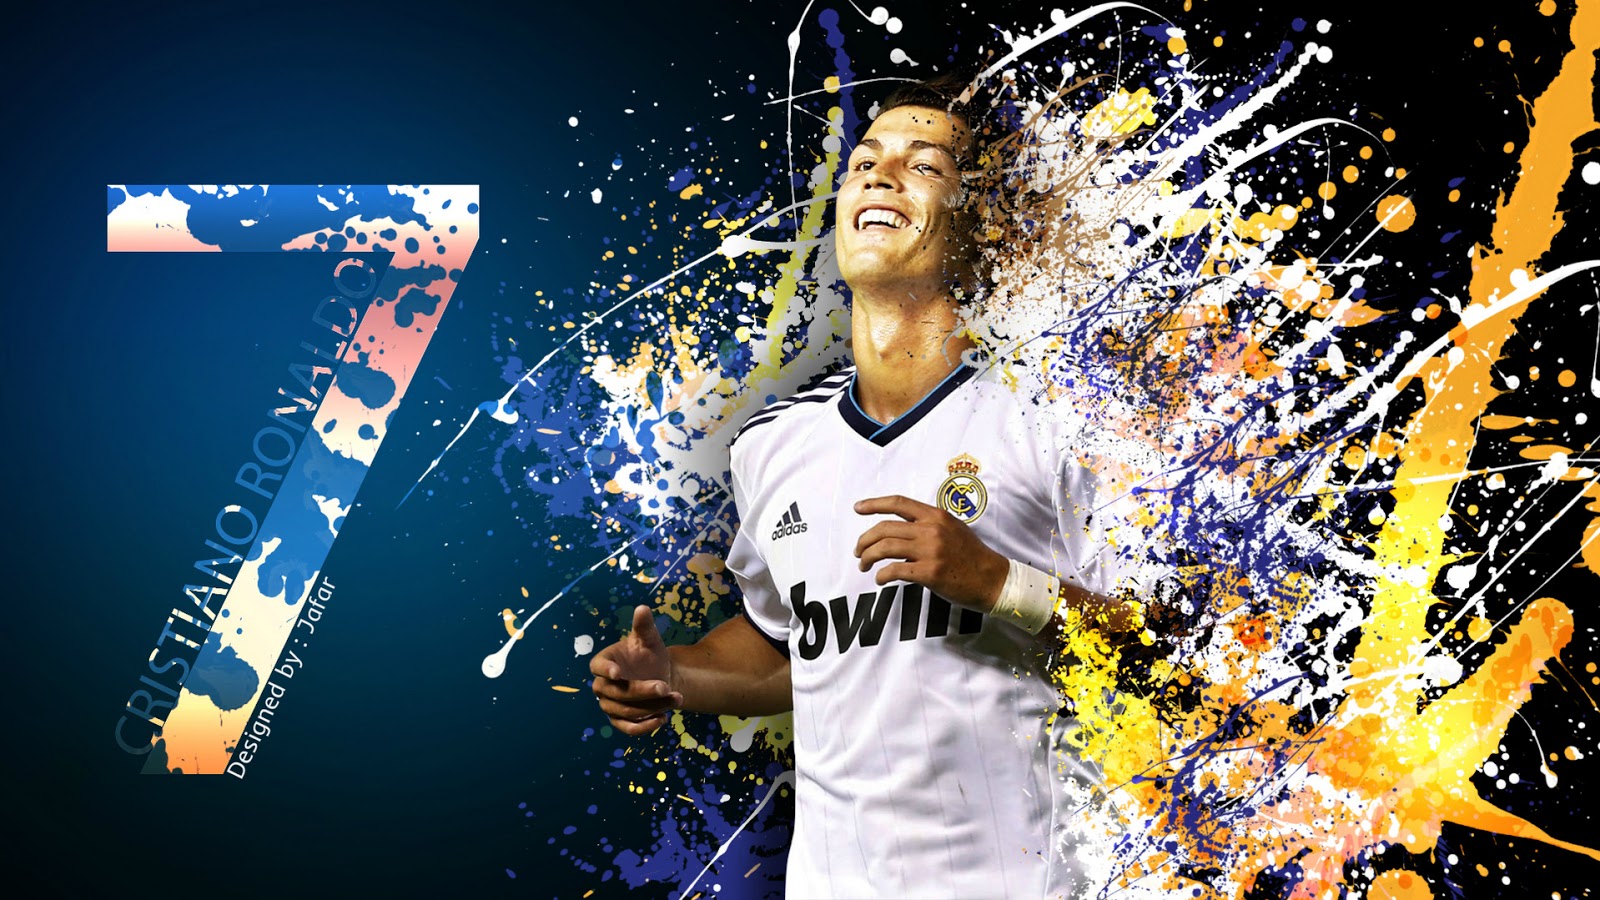 ALL SPORTS PLAYERS: Cristiano Ronaldo hd Wallpapers 2013